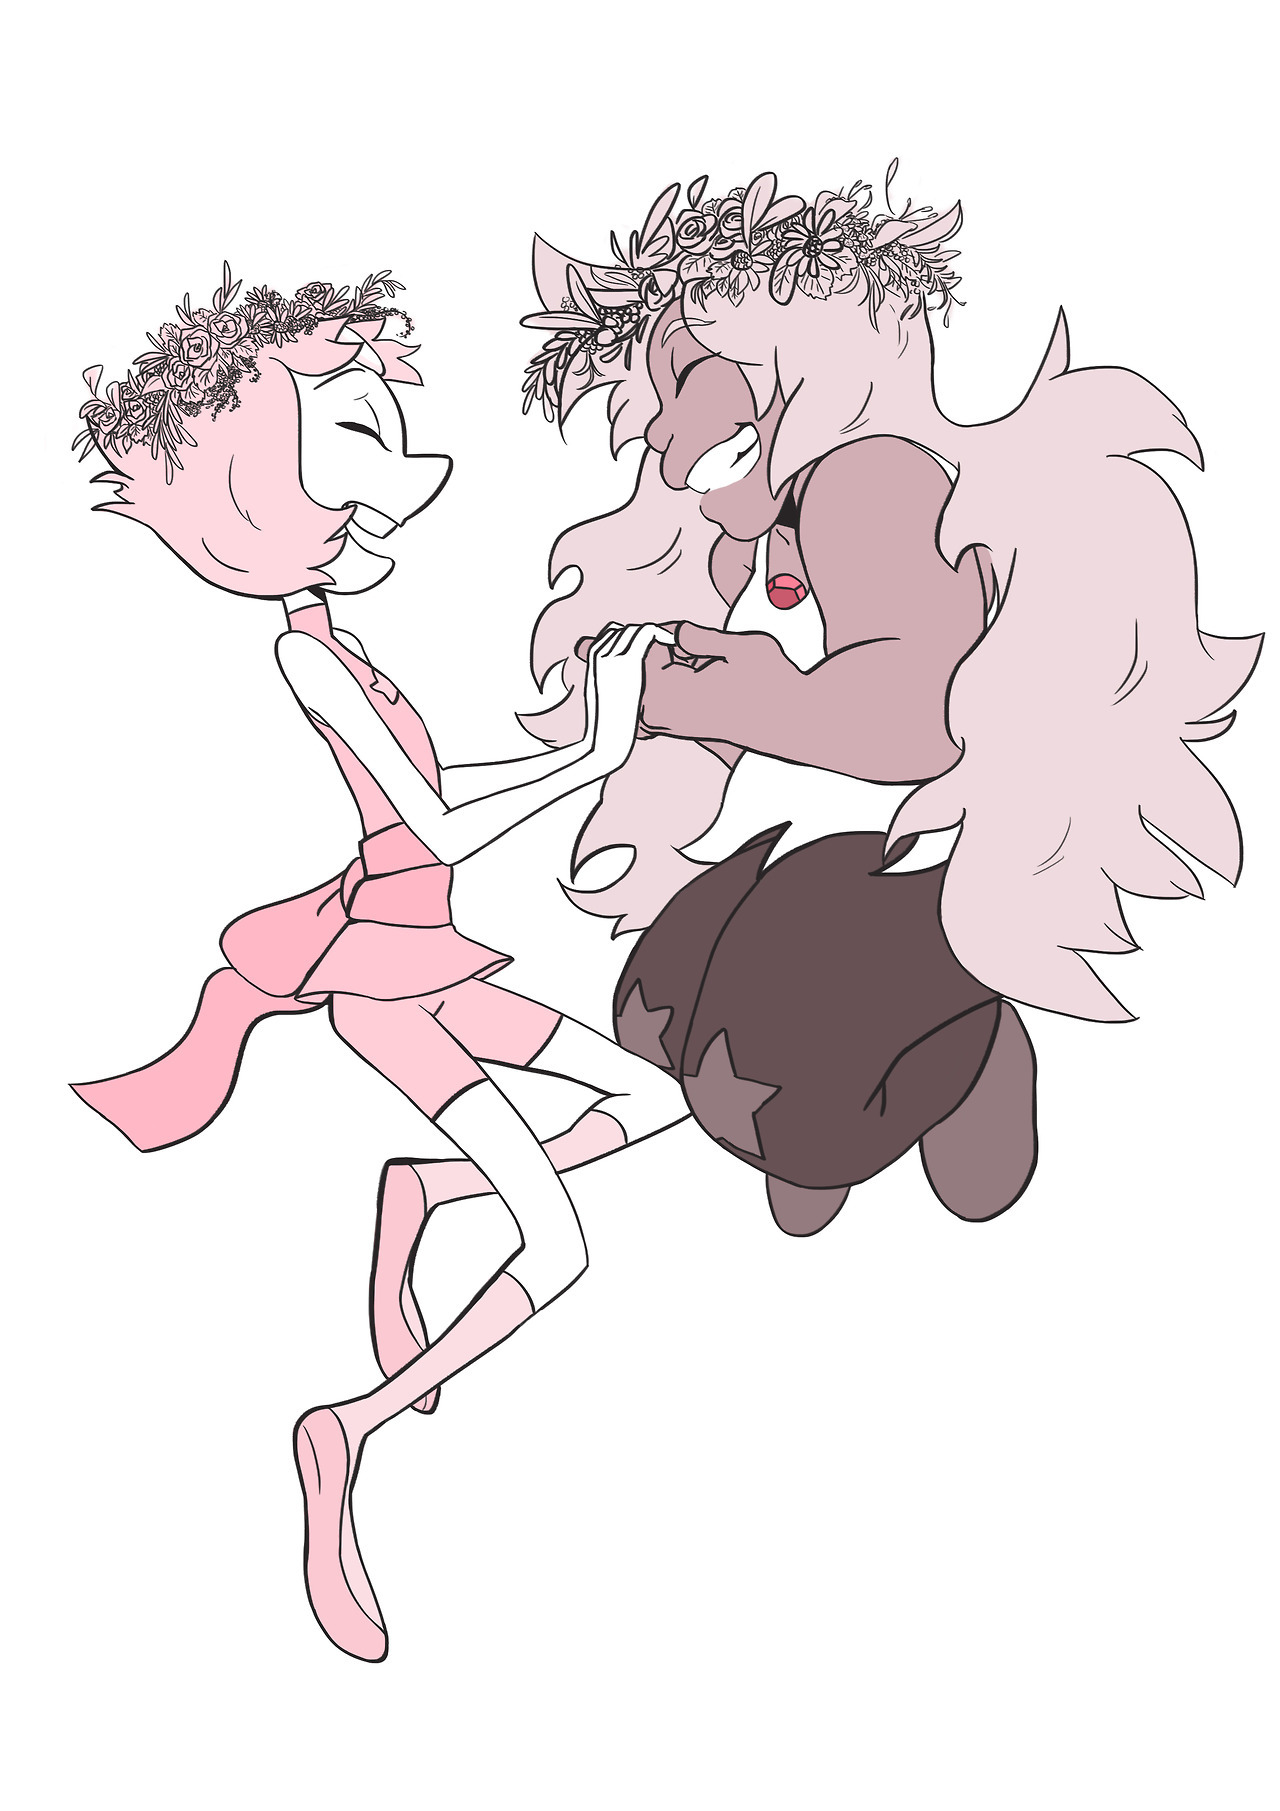 Day 3 - flowers @fuckyeahpearlmethyst i managed to find the time to do this